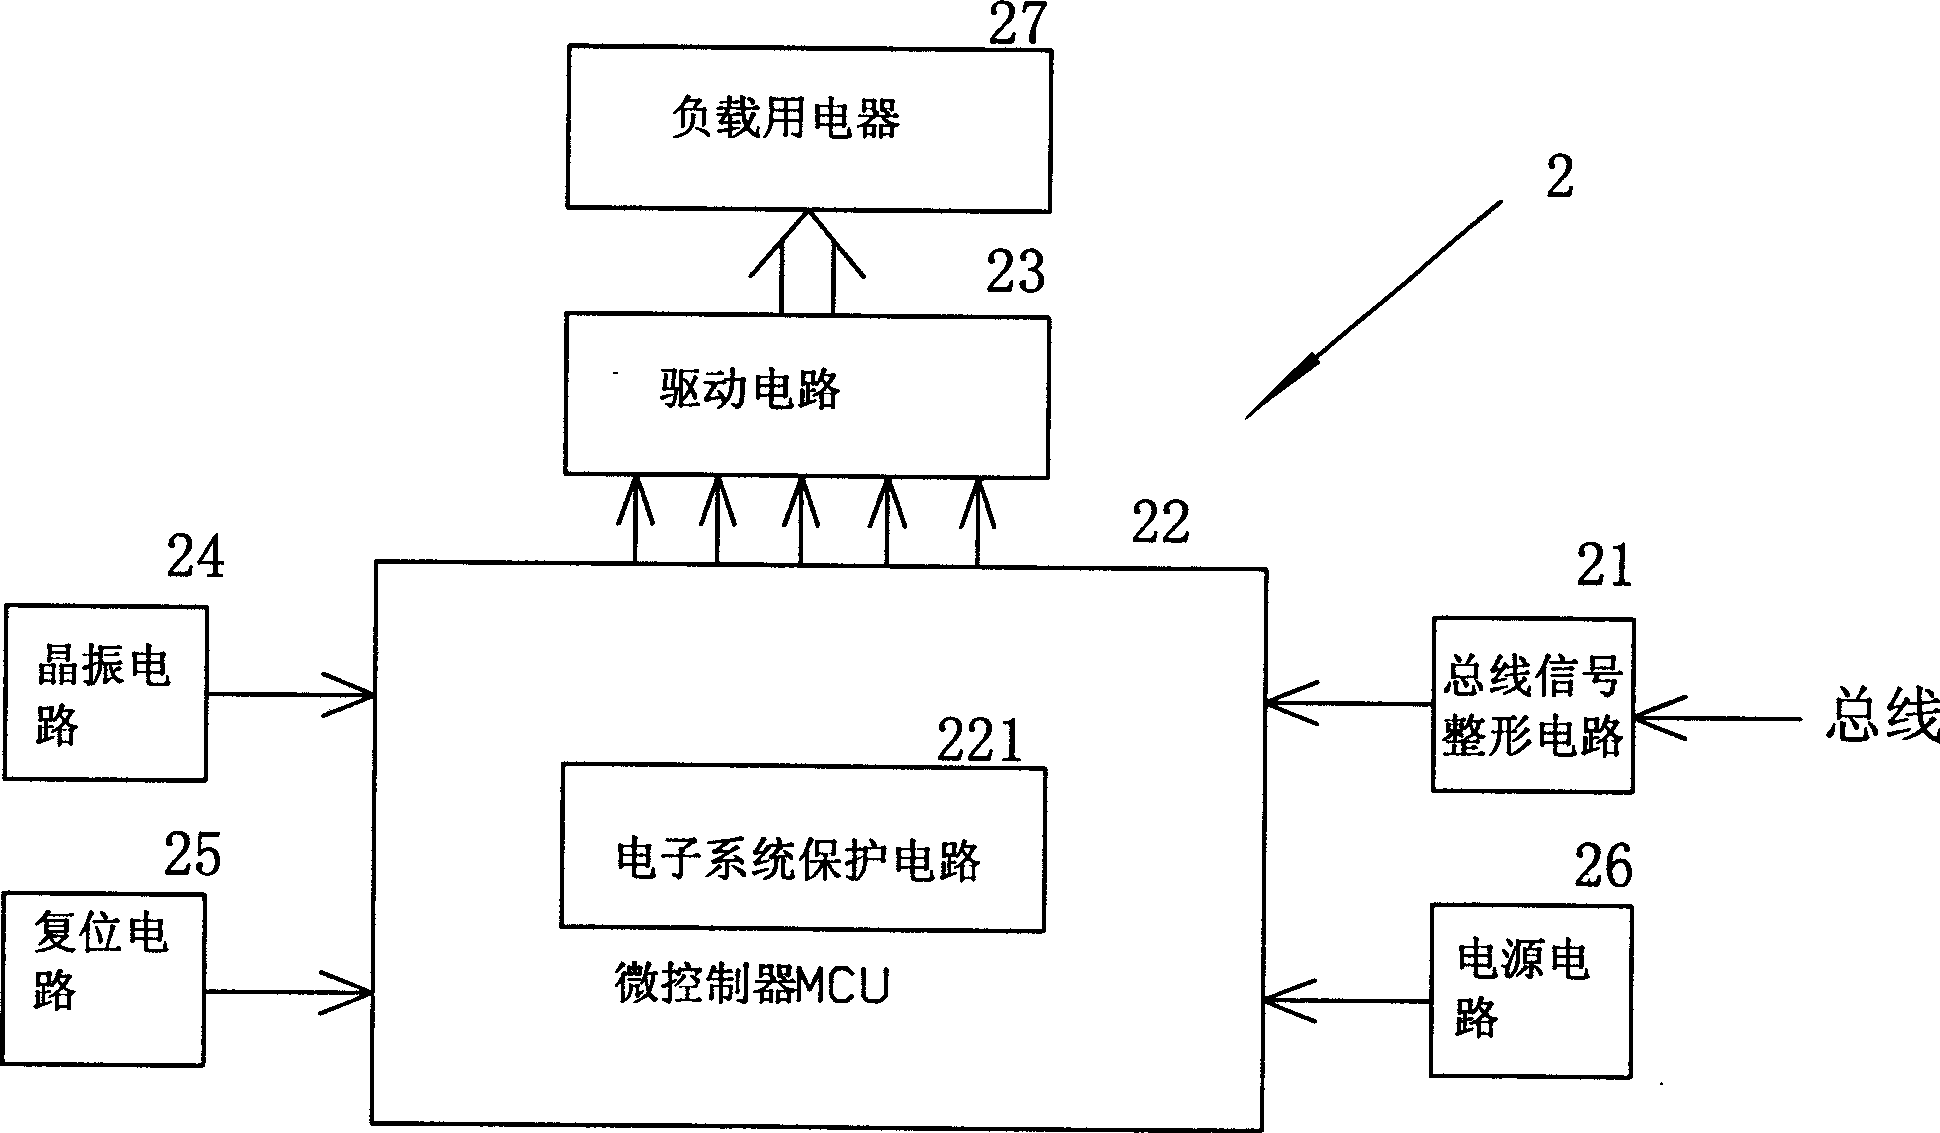 Synchronous signal telecommunication controlling system of vehicle bus